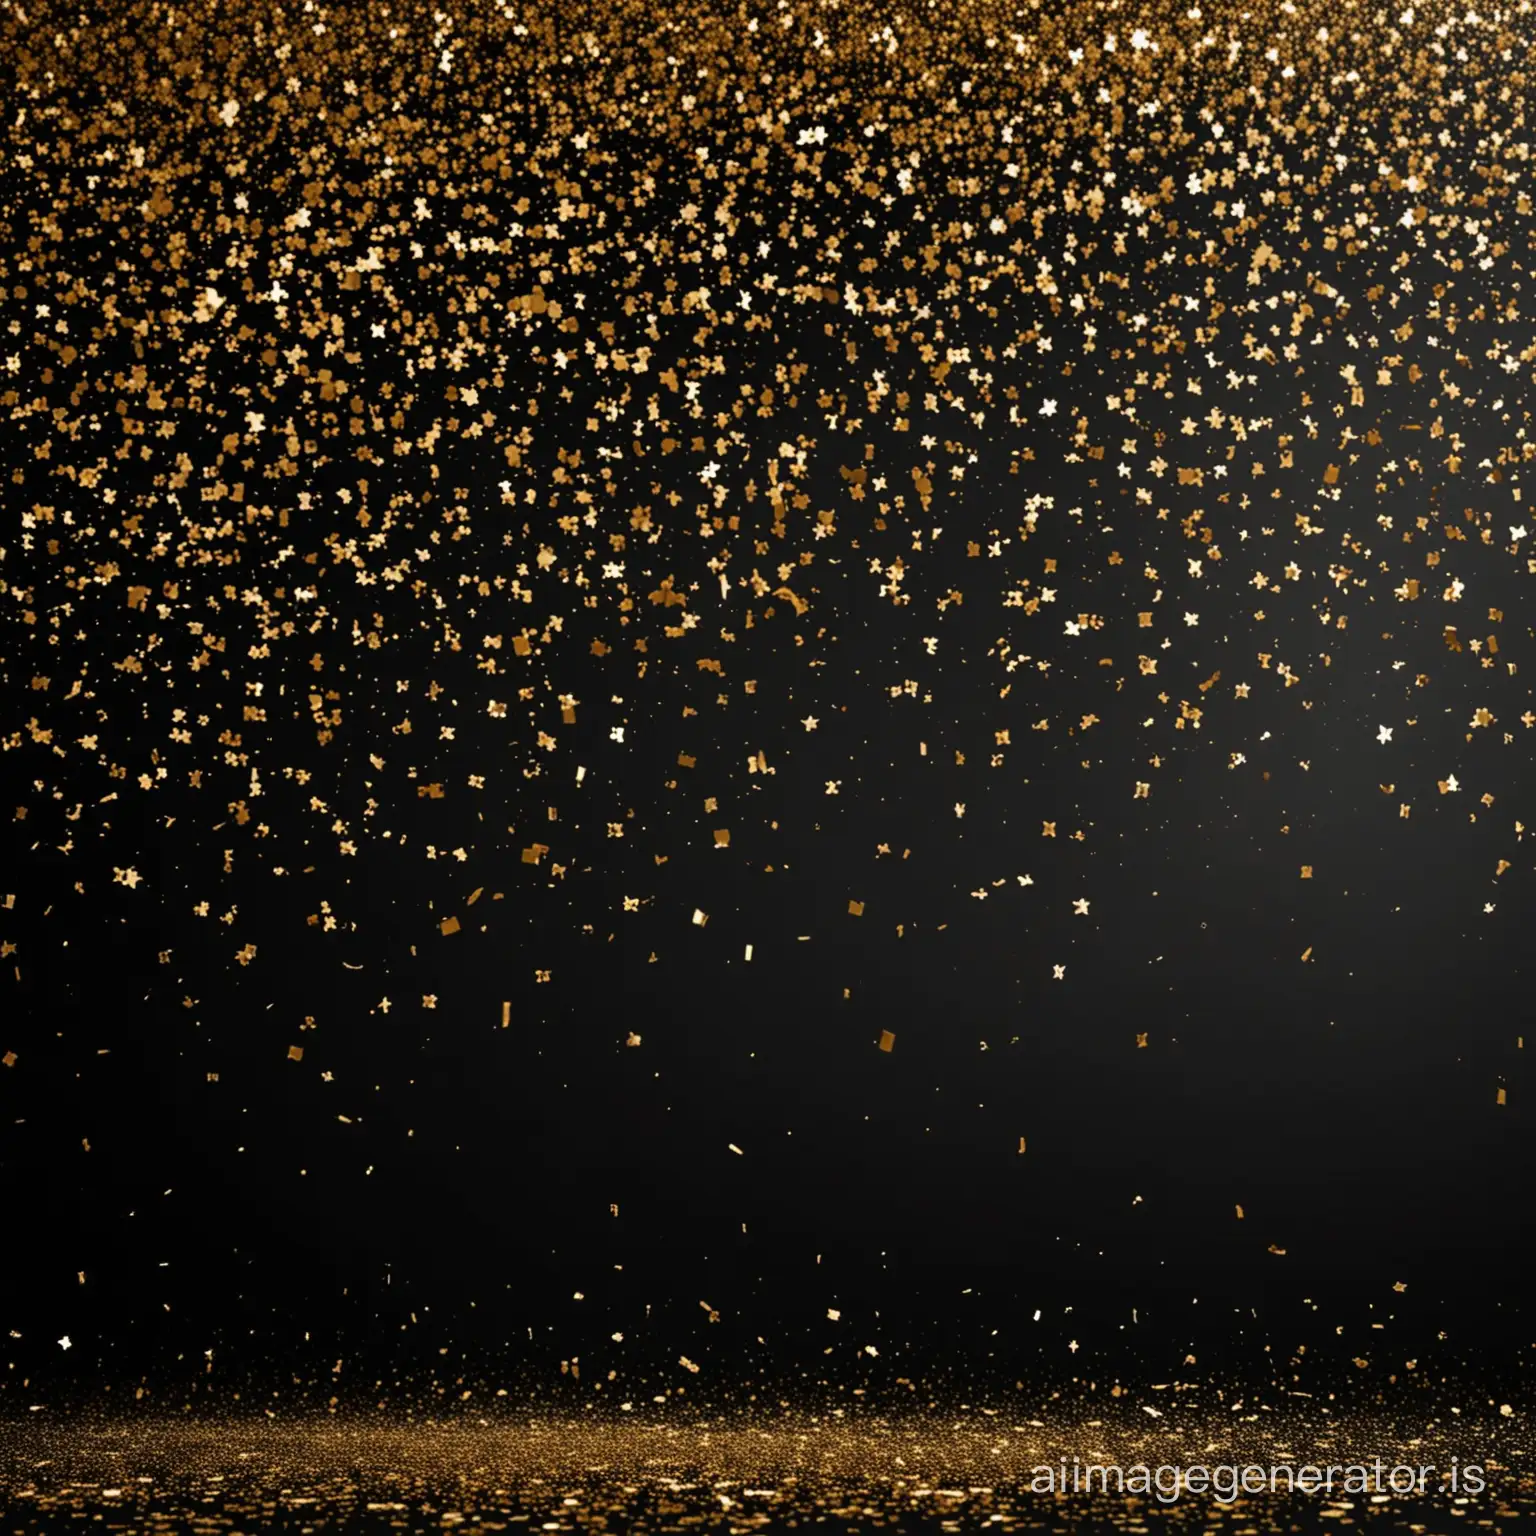 Golden confetti falling from the sky, black background